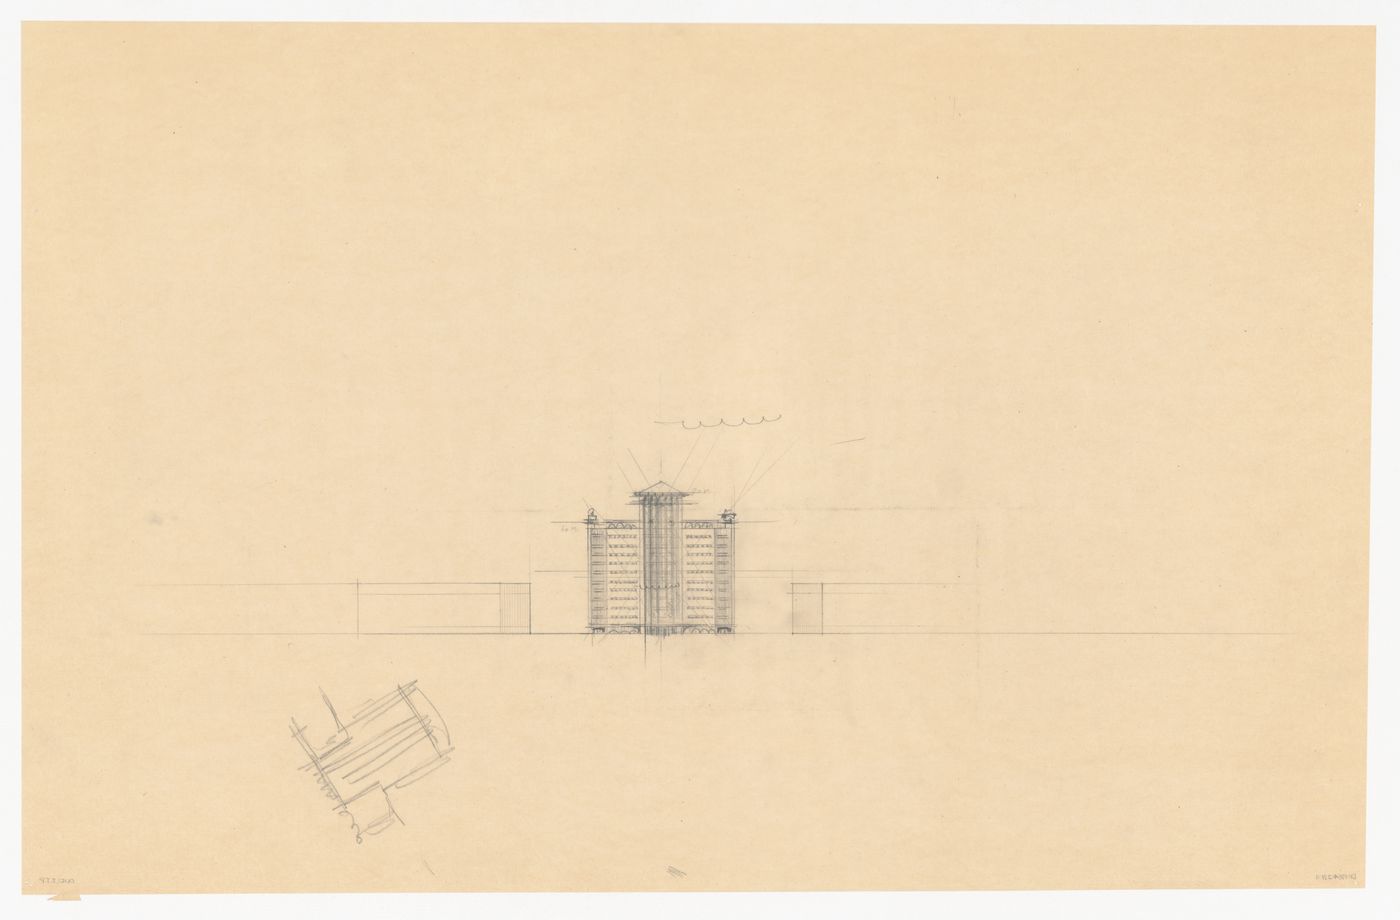 Elevation and sketch elevation for Industriegebouw Plan A for the reconstruction of the Hofplein (city centre), Rotterdam, Netherlands